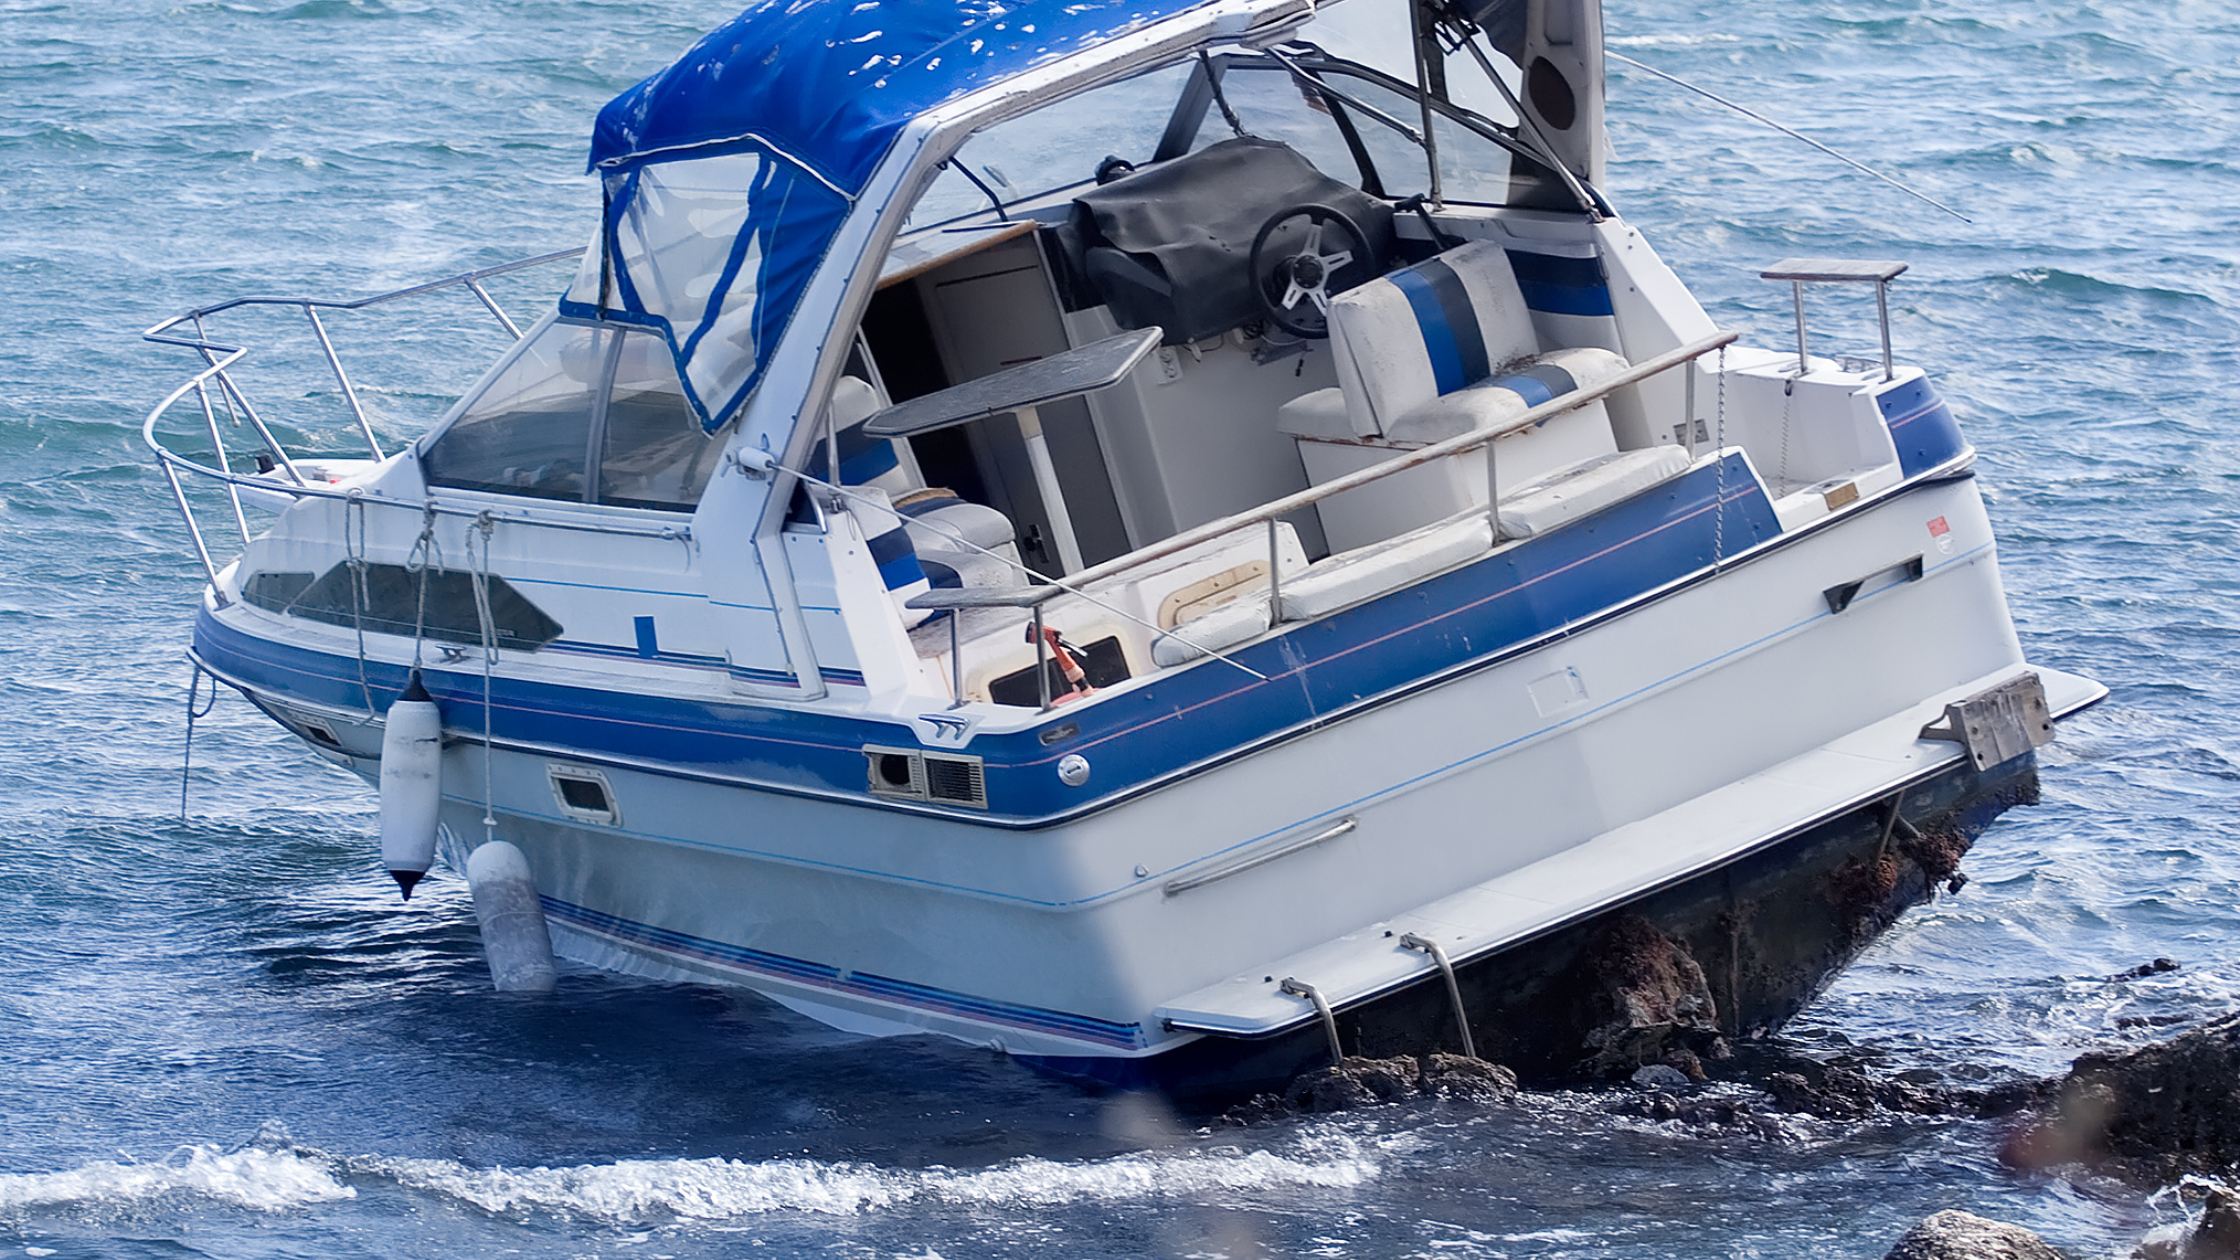 Boat Accident Lawyer In Los Angeles, CA